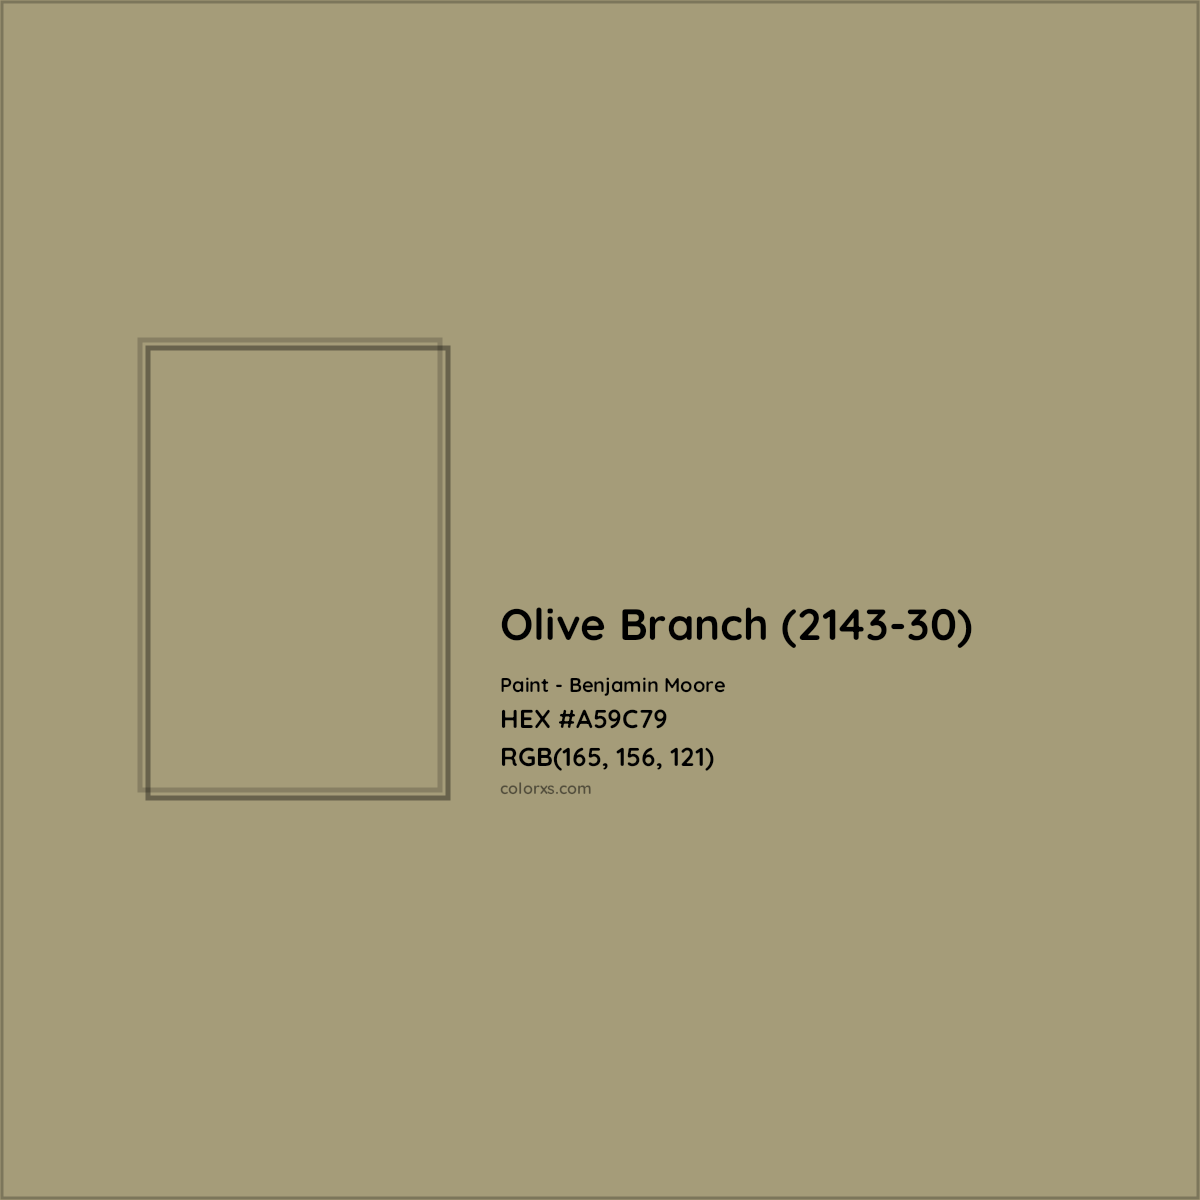 HEX #A59C79 Olive Branch (2143-30) Paint Benjamin Moore - Color Code